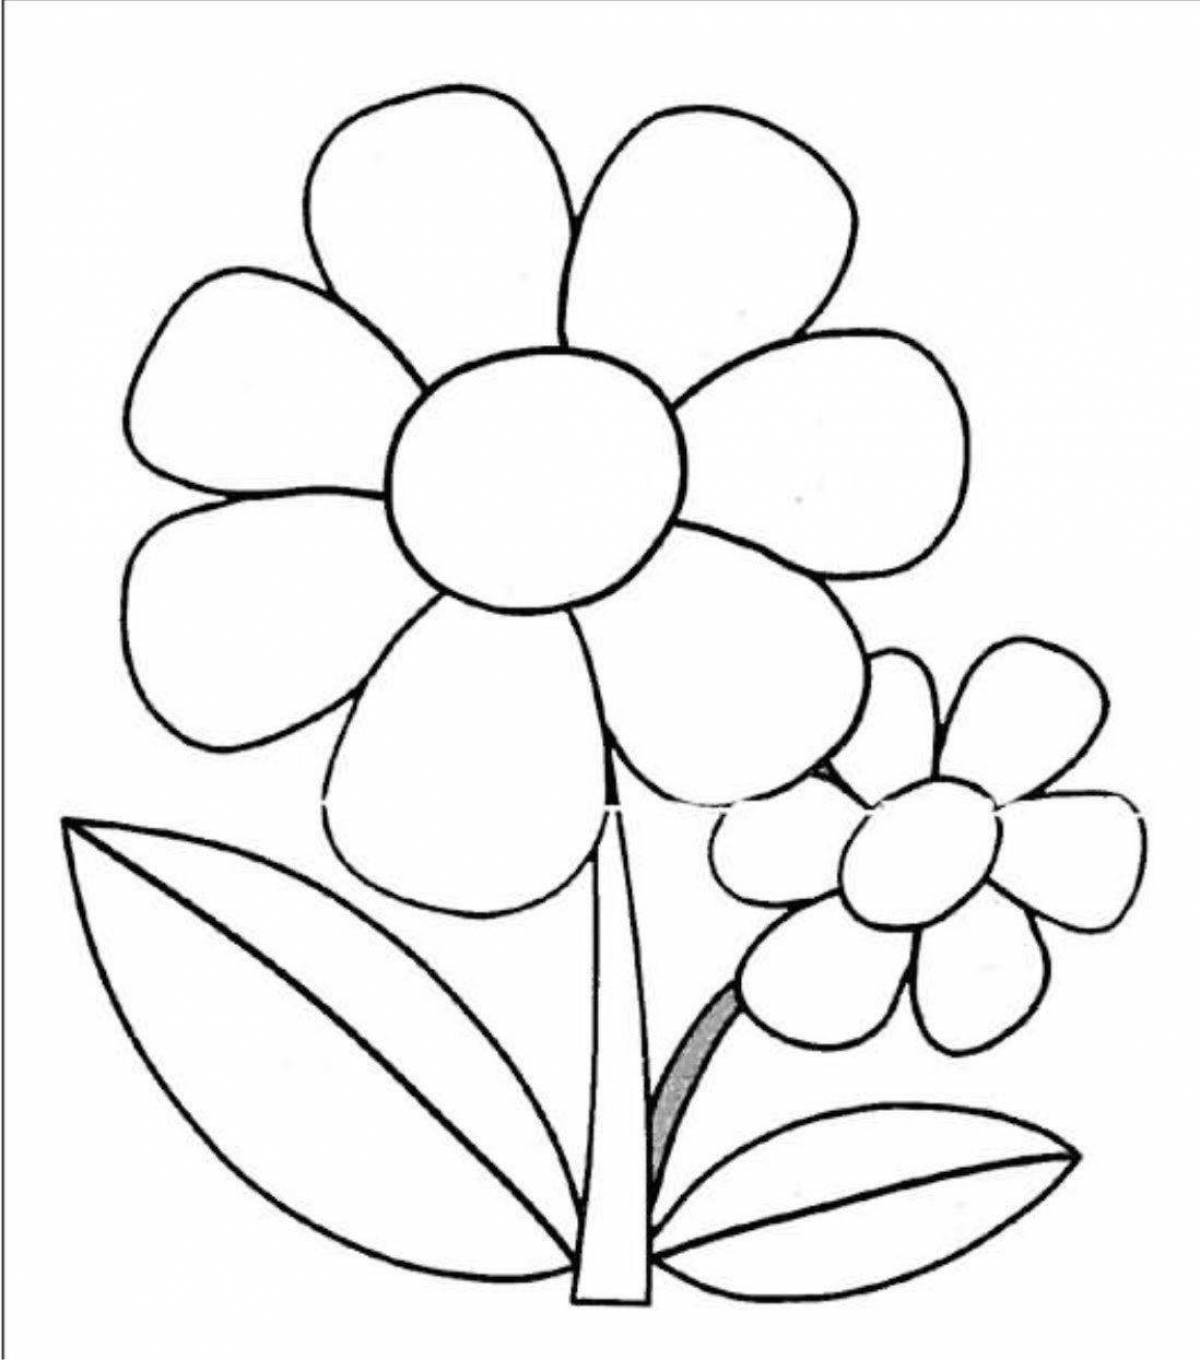 Coloring page inviting flower pattern